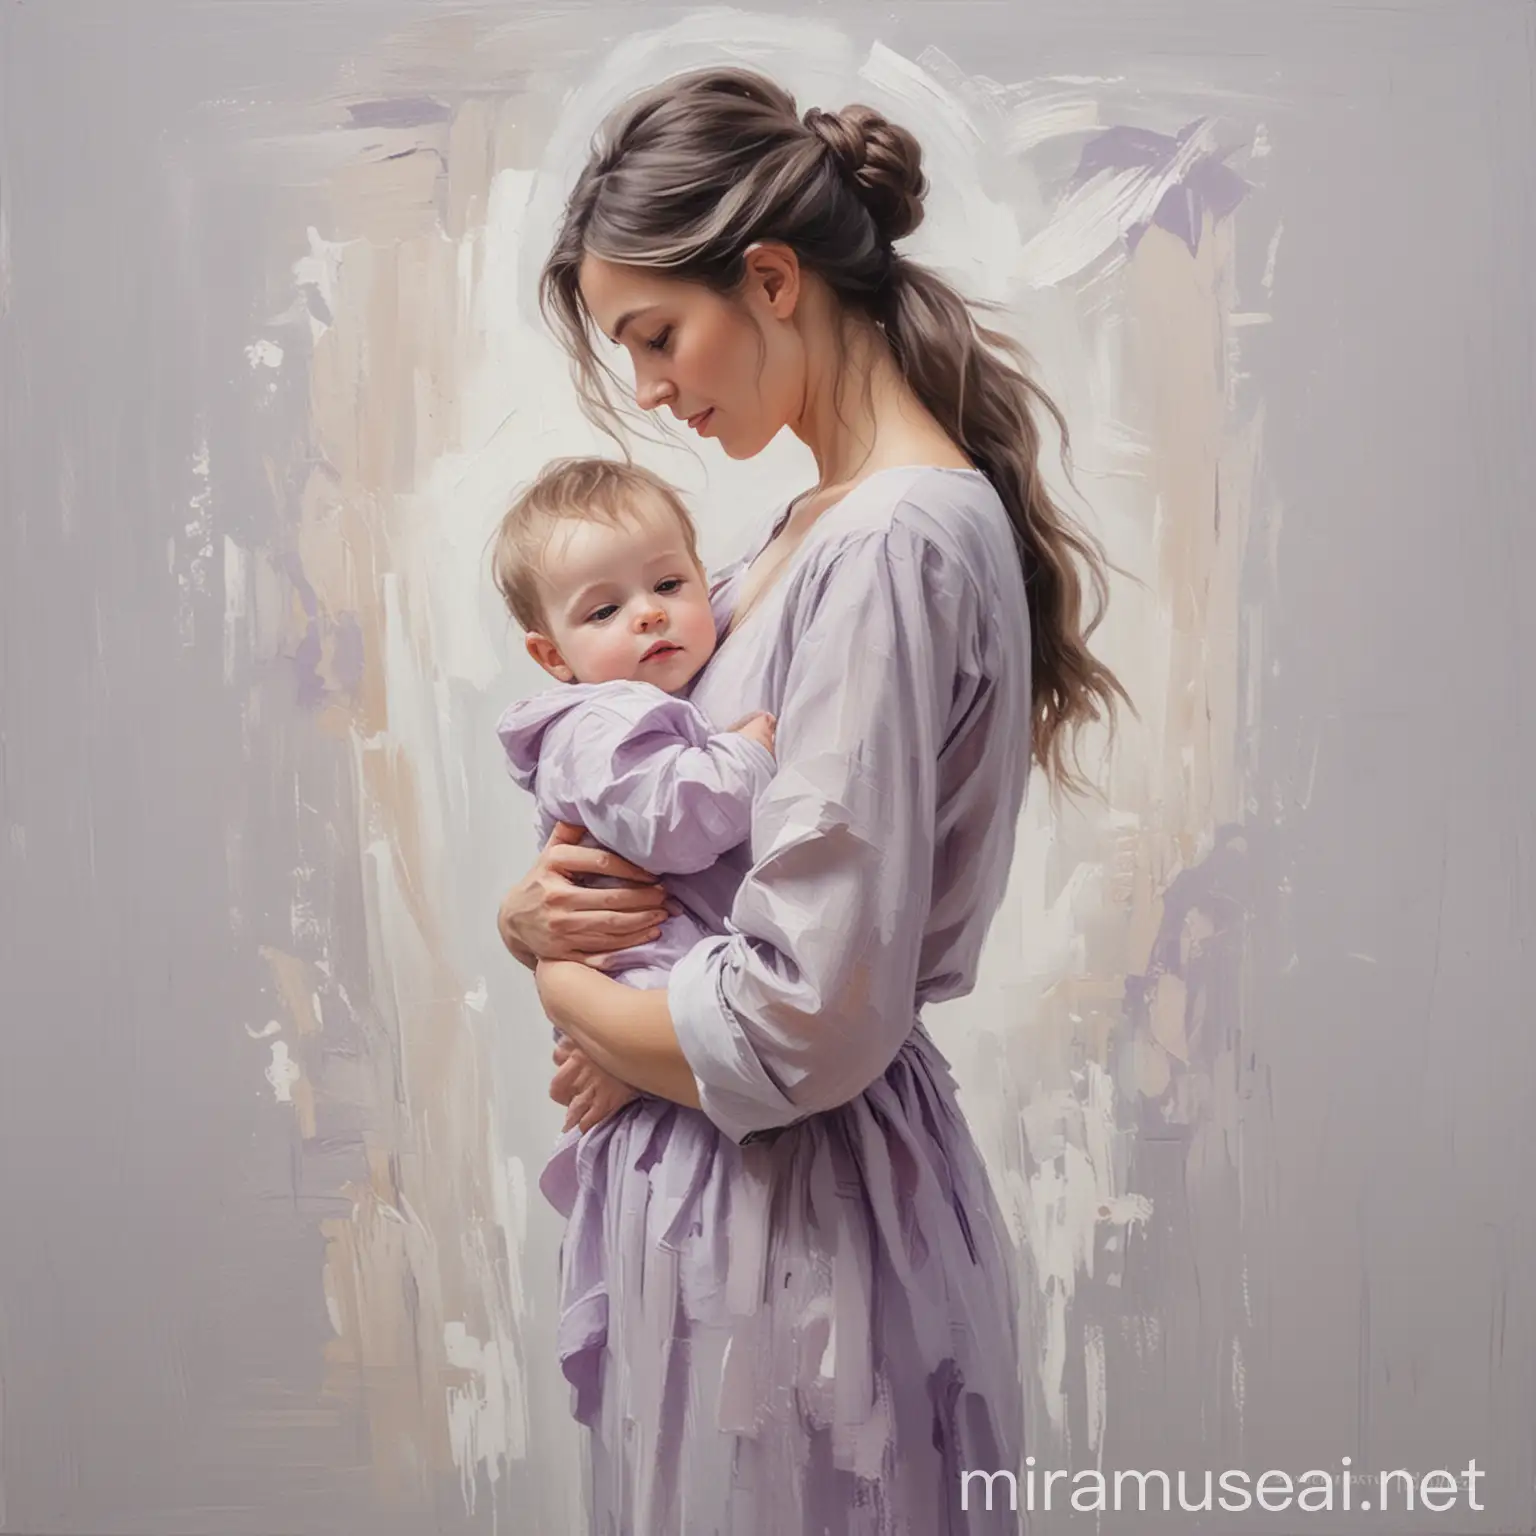 Mother and Child Embraced in Ethereal Dream Impressionist Oil Painting